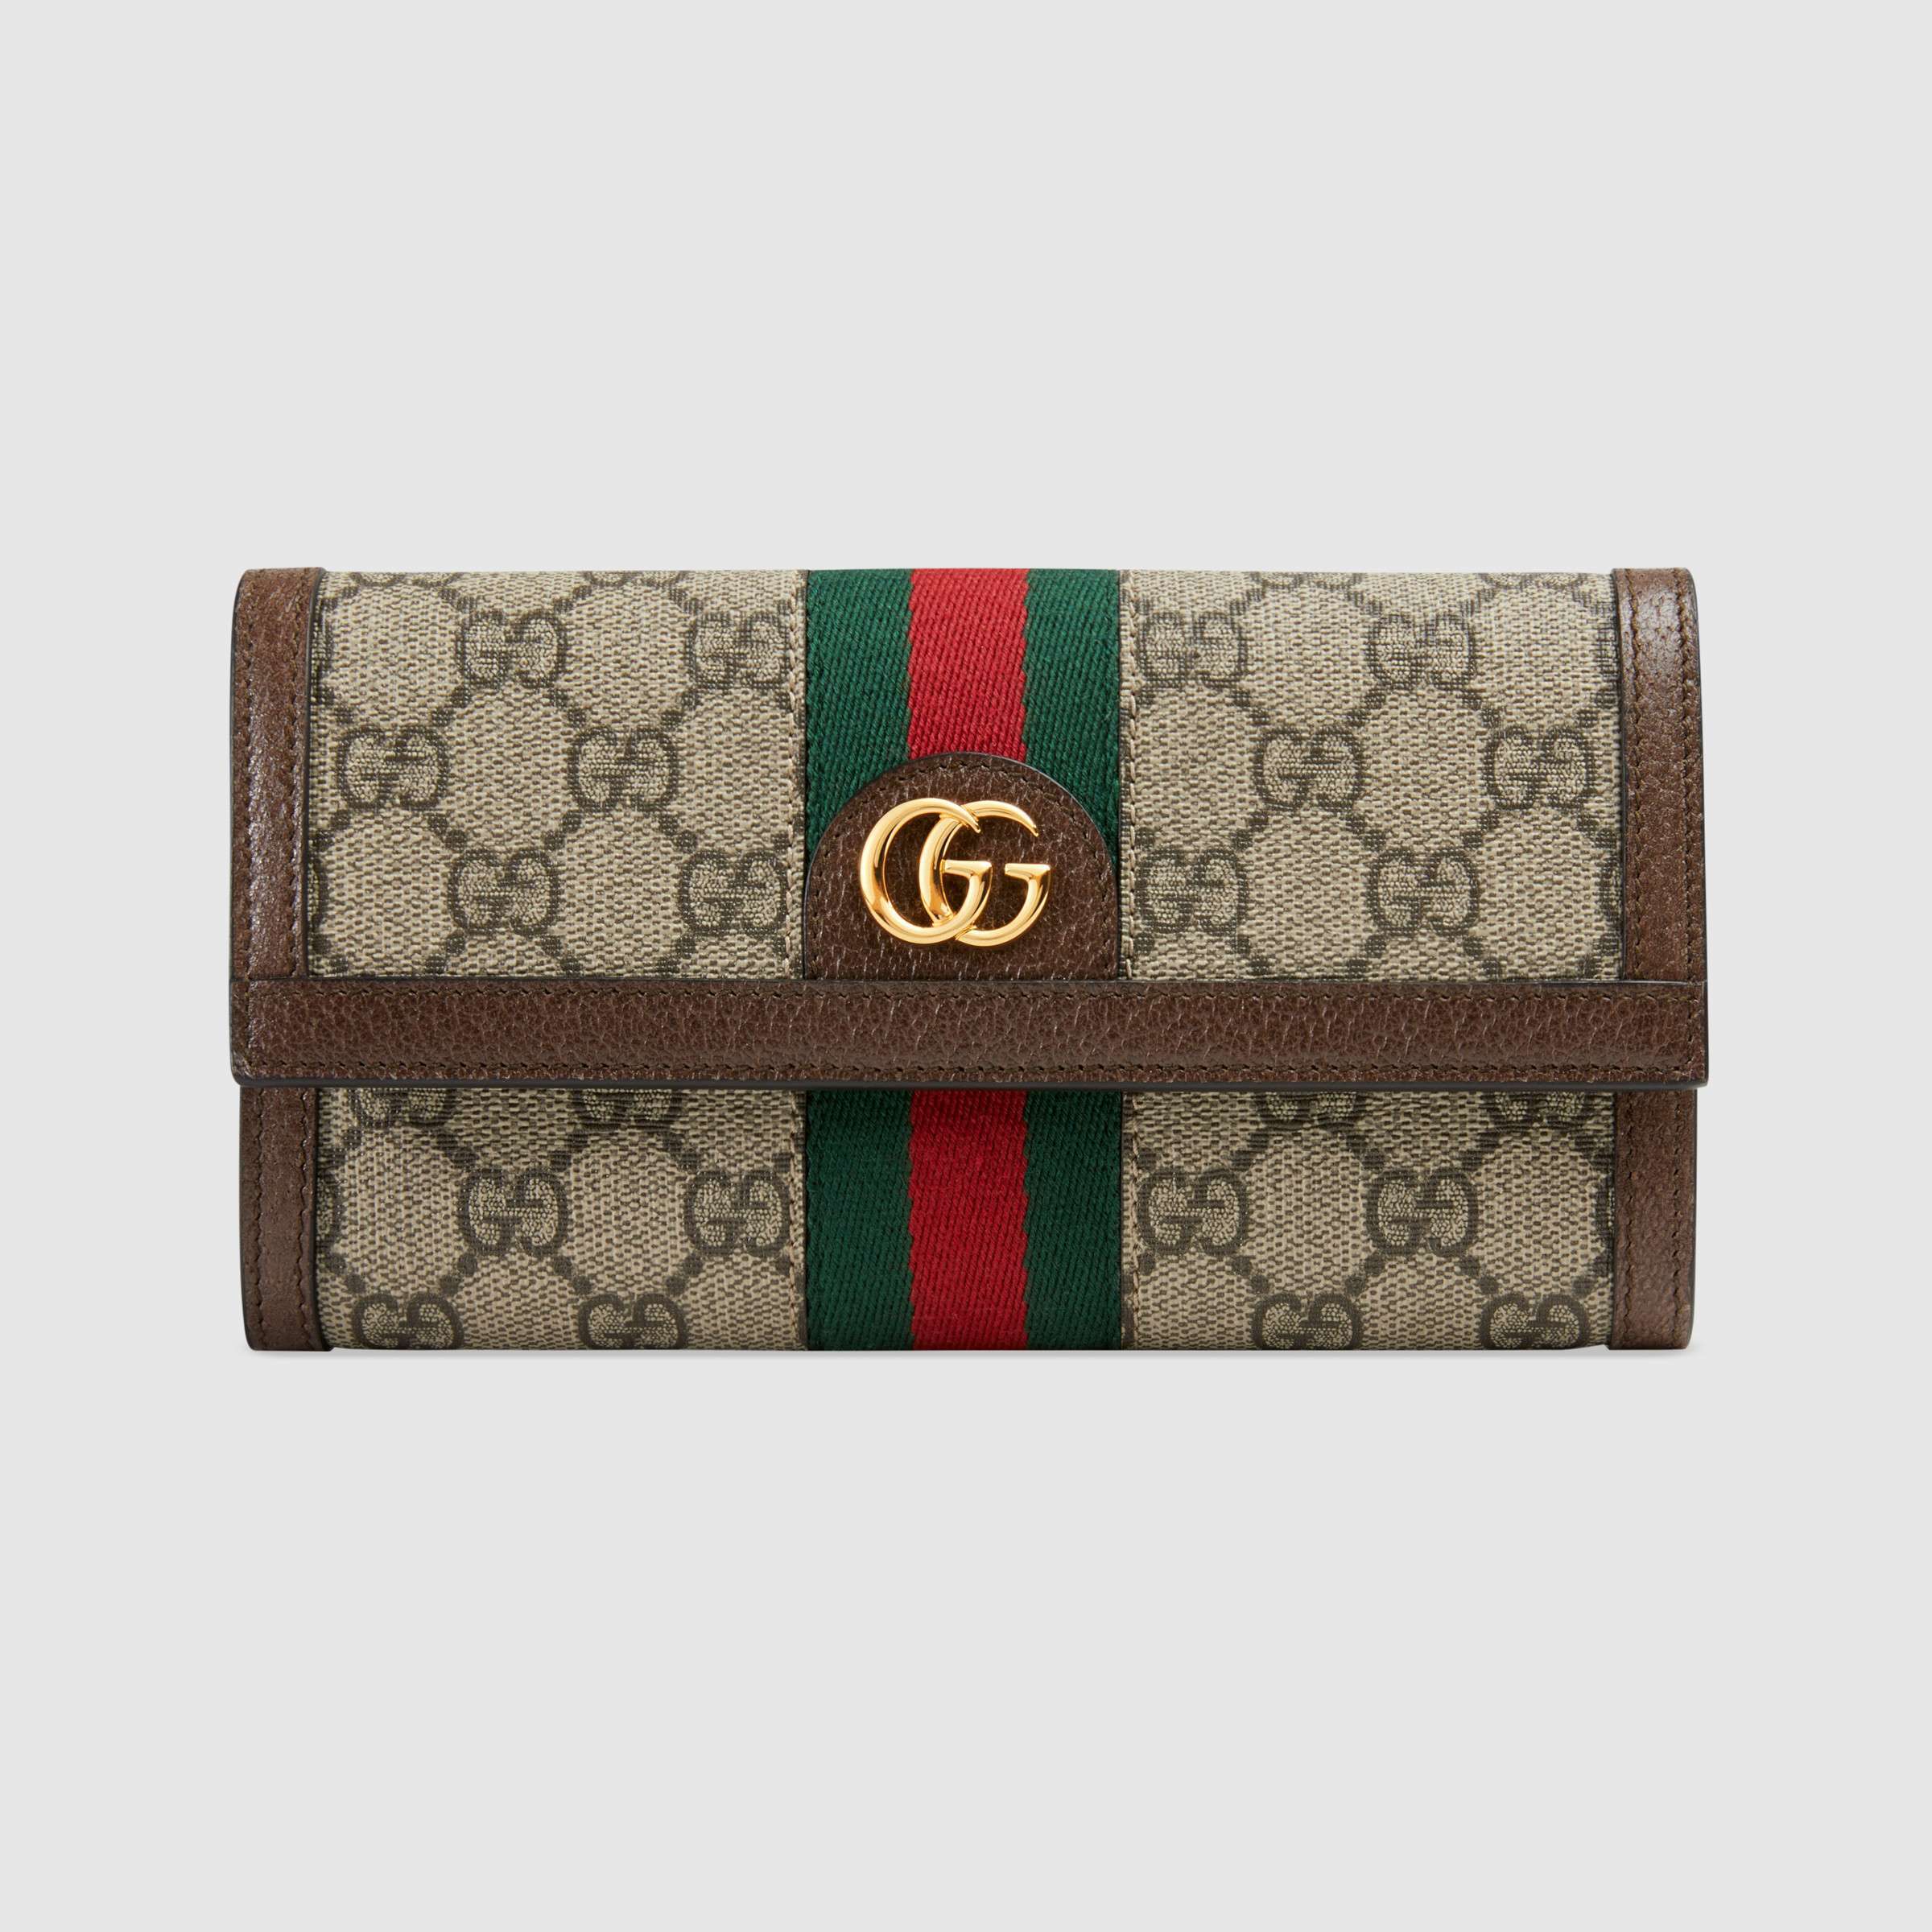 Gucci wallet online sale leather Ophidia GG continental wallet bifold cheap womens credit card ...